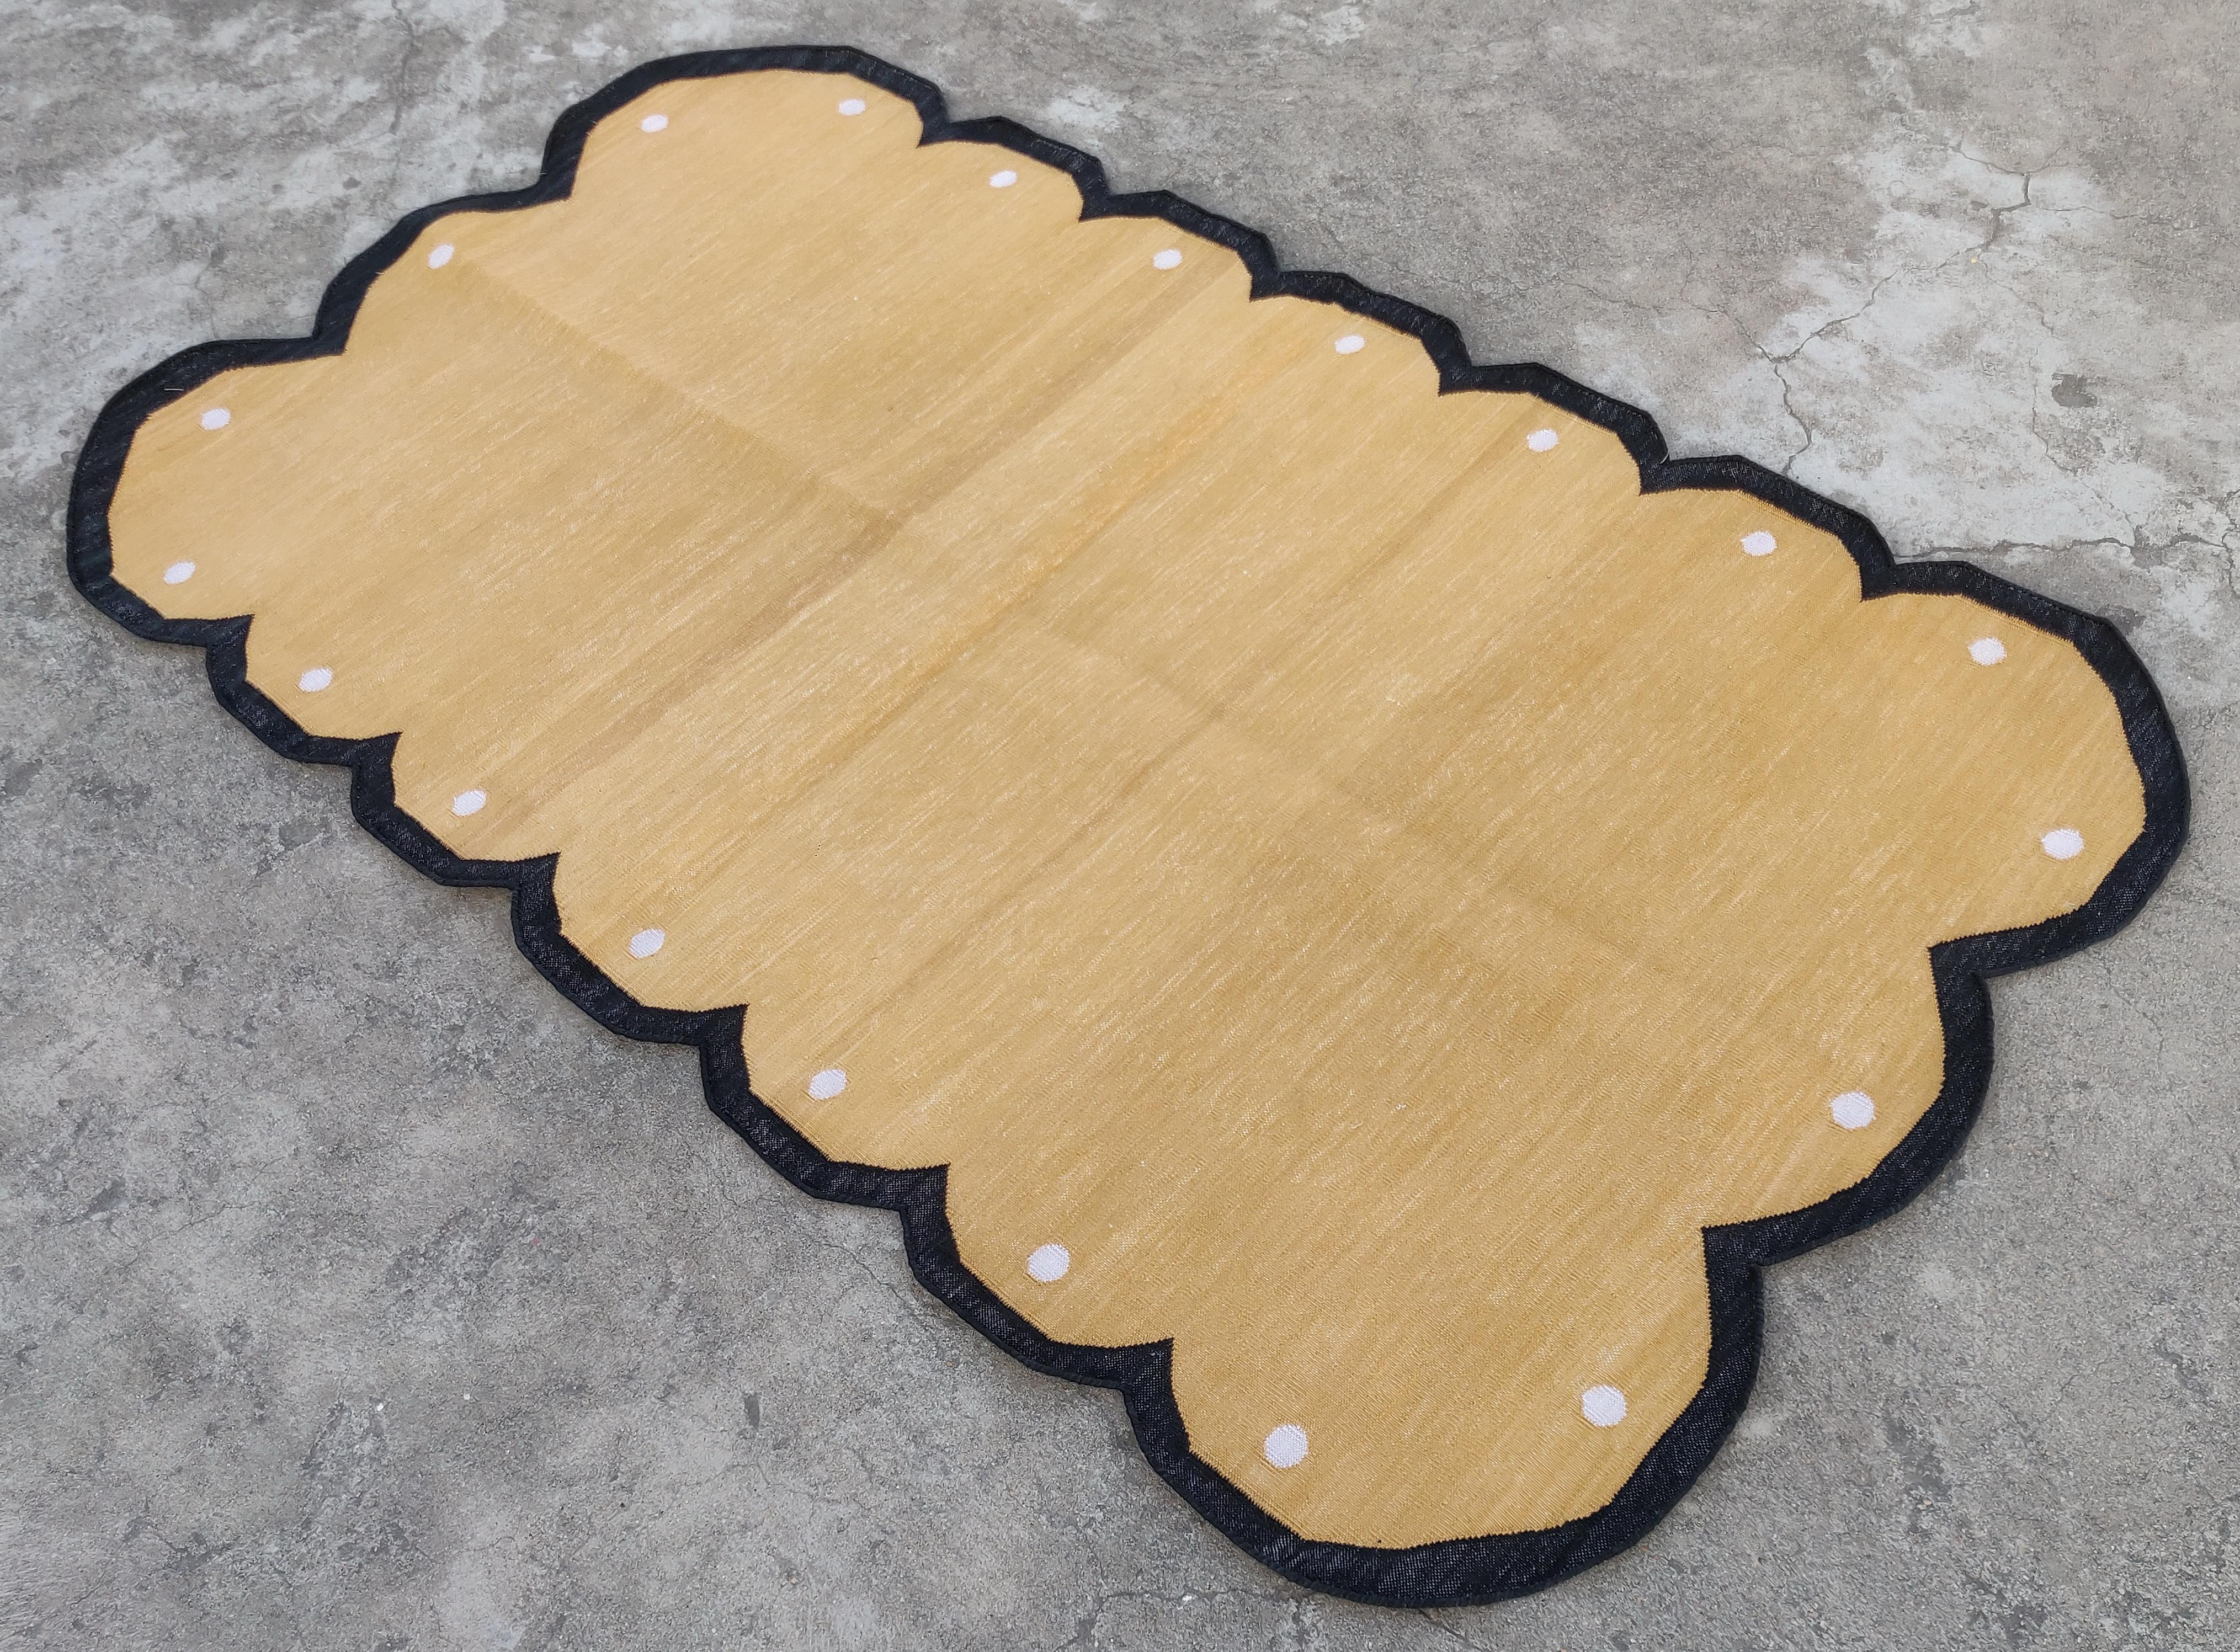 Cotton Vegetable Dyed Mustard, Cream And Black Scalloped Indian Dhurrie Rug-3'x5' (Scallops runs on all four sides)

These special flat-weave dhurries are hand-woven with 15 ply 100% cotton yarn. Due to the special manufacturing techniques used to